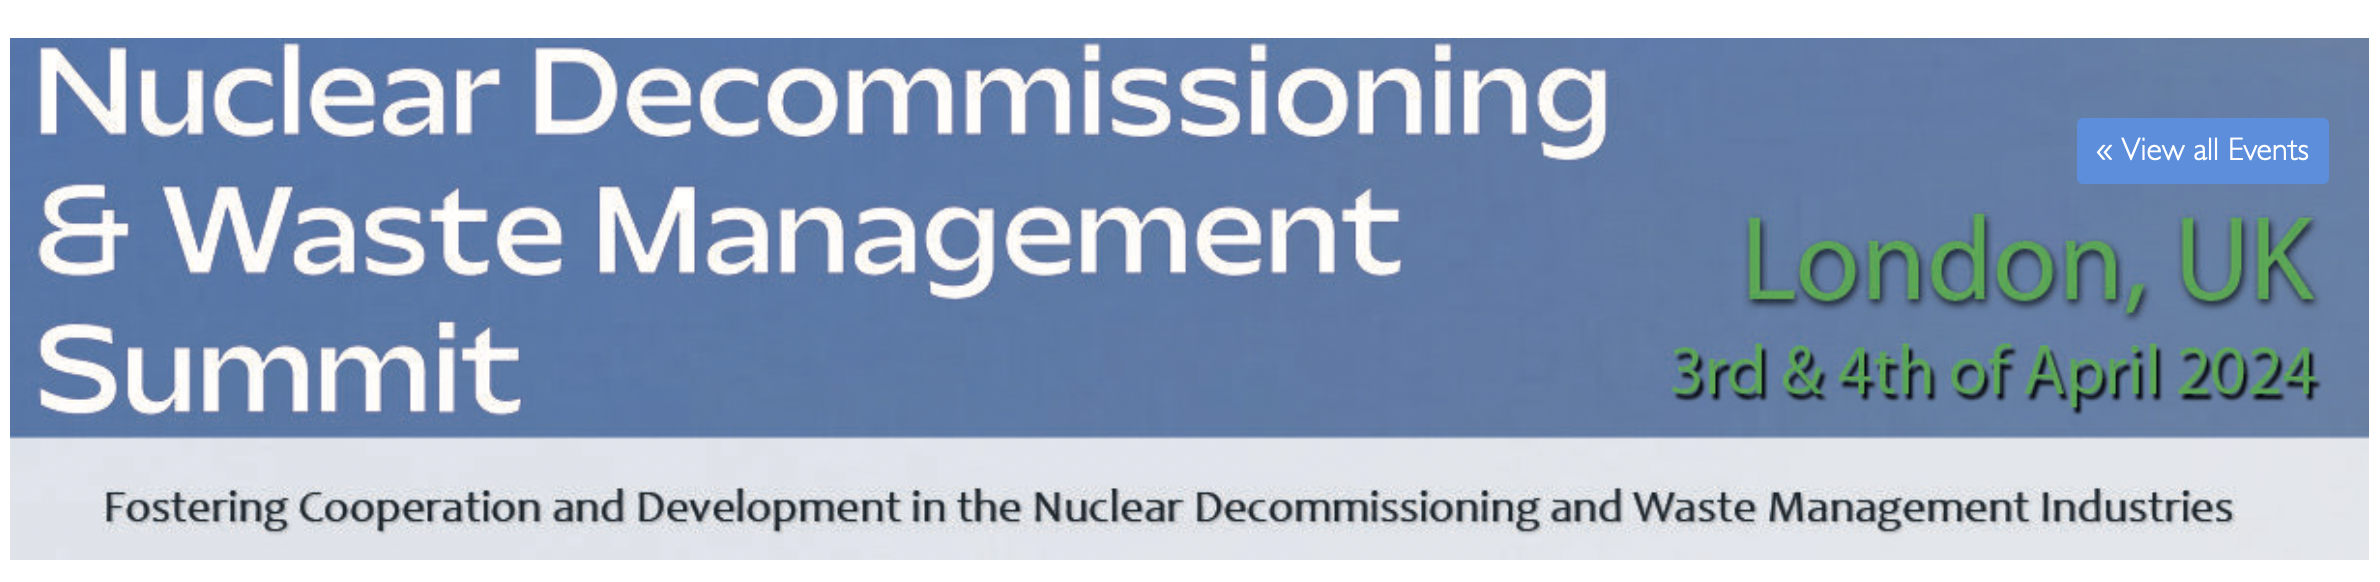 Nuclear Decommissioning & Waste Management Summit 2024